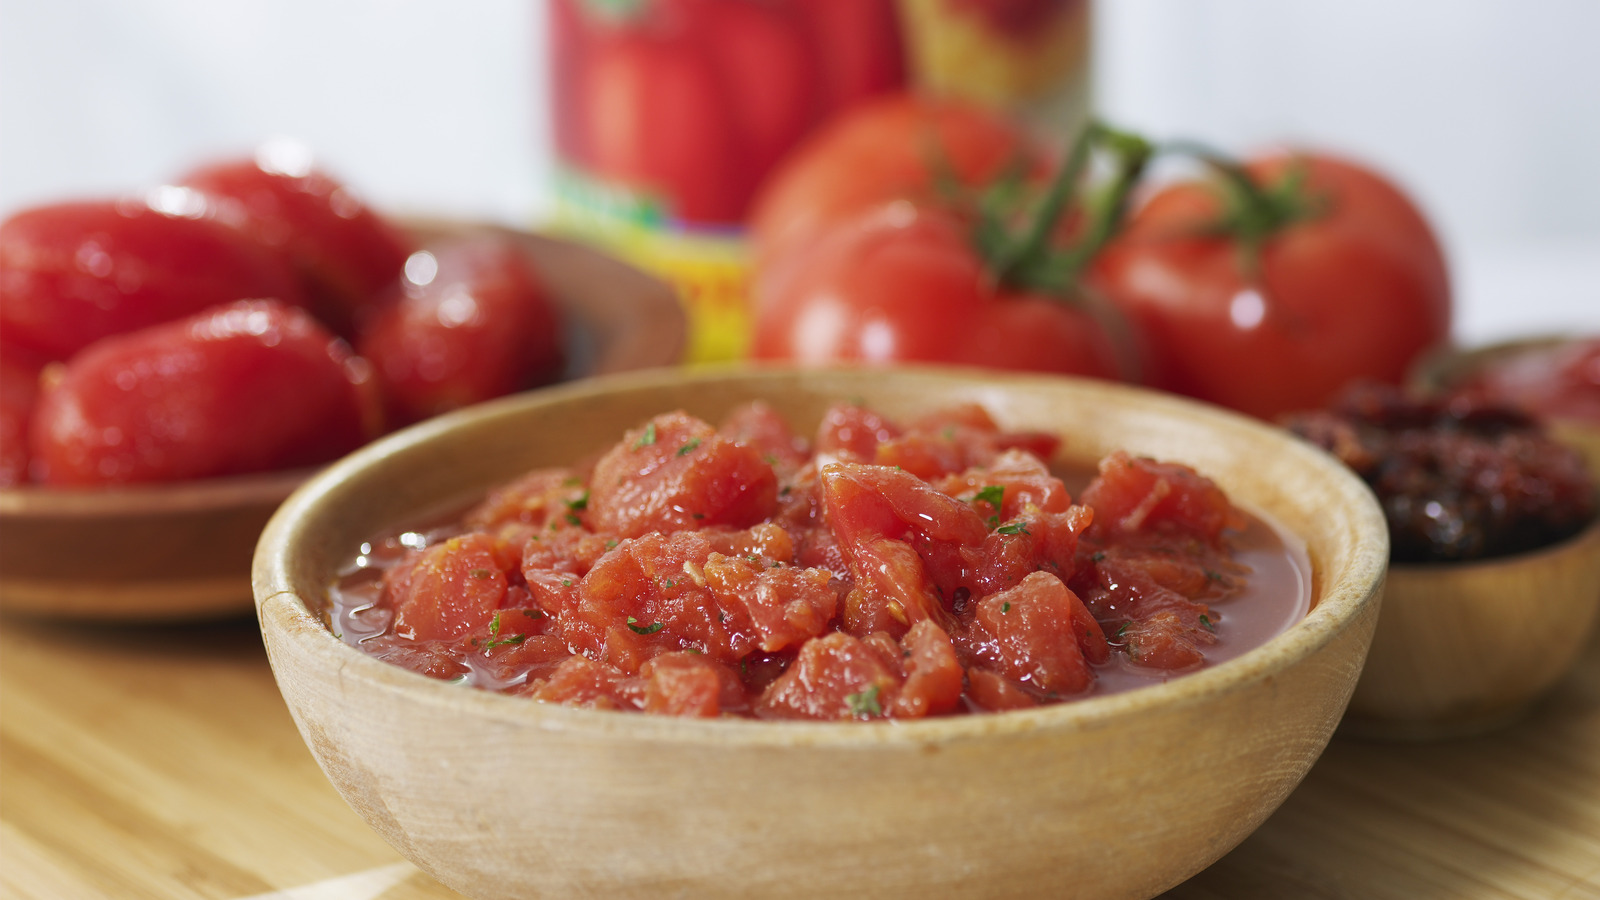 The salad spinner trick to remove seeds from canned tomatoes